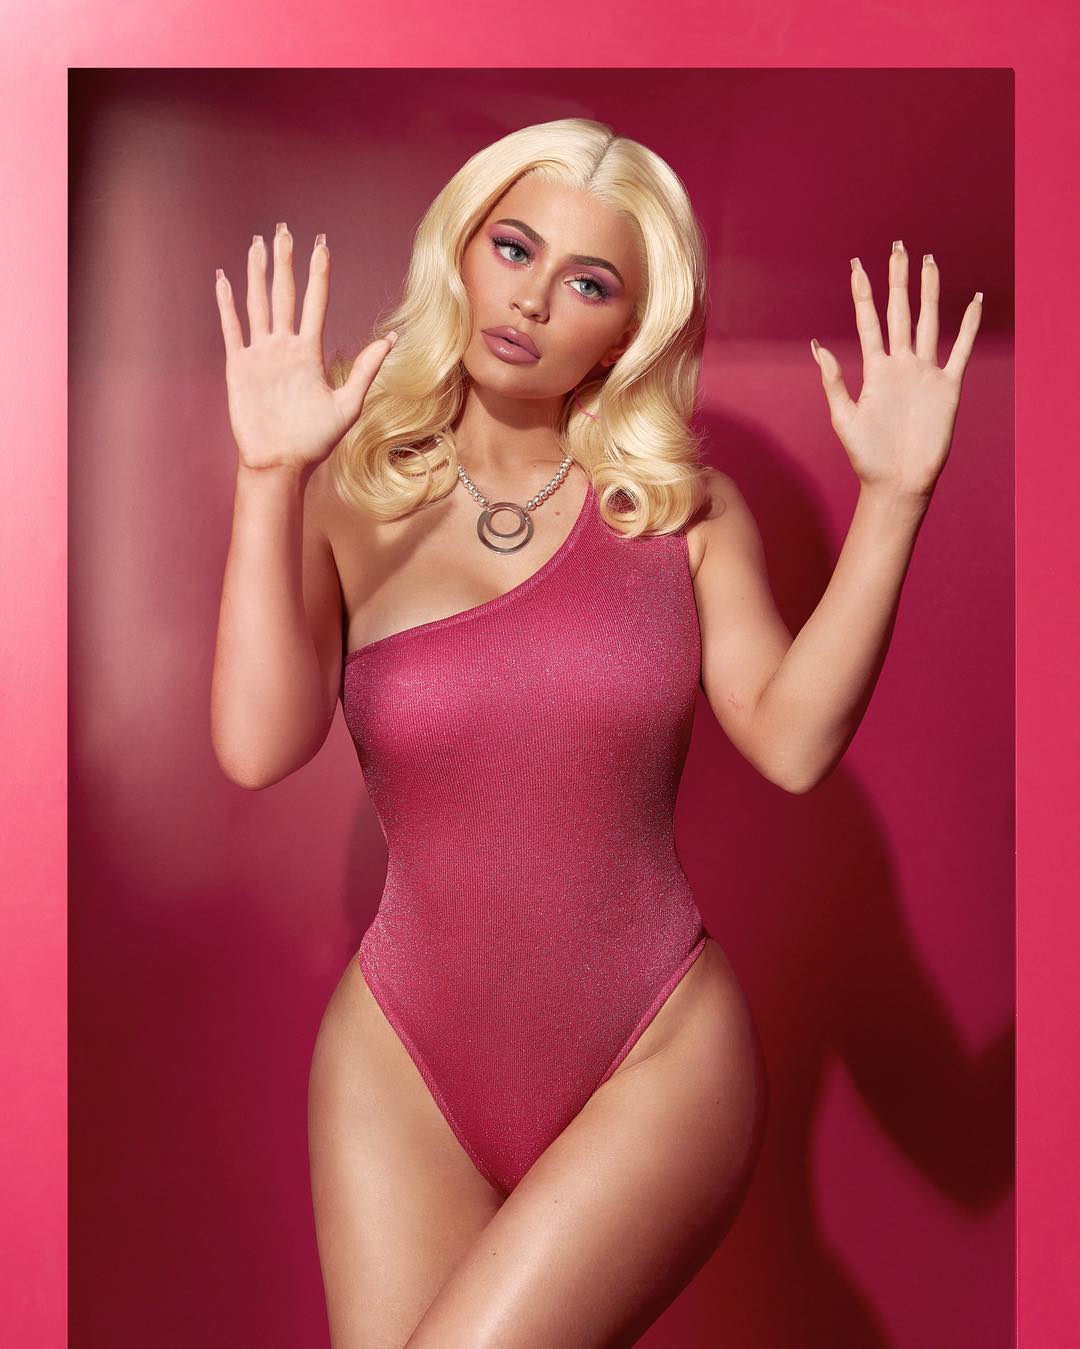 Kylie Jenner â€“ Dressed up as Barbie for Halloween